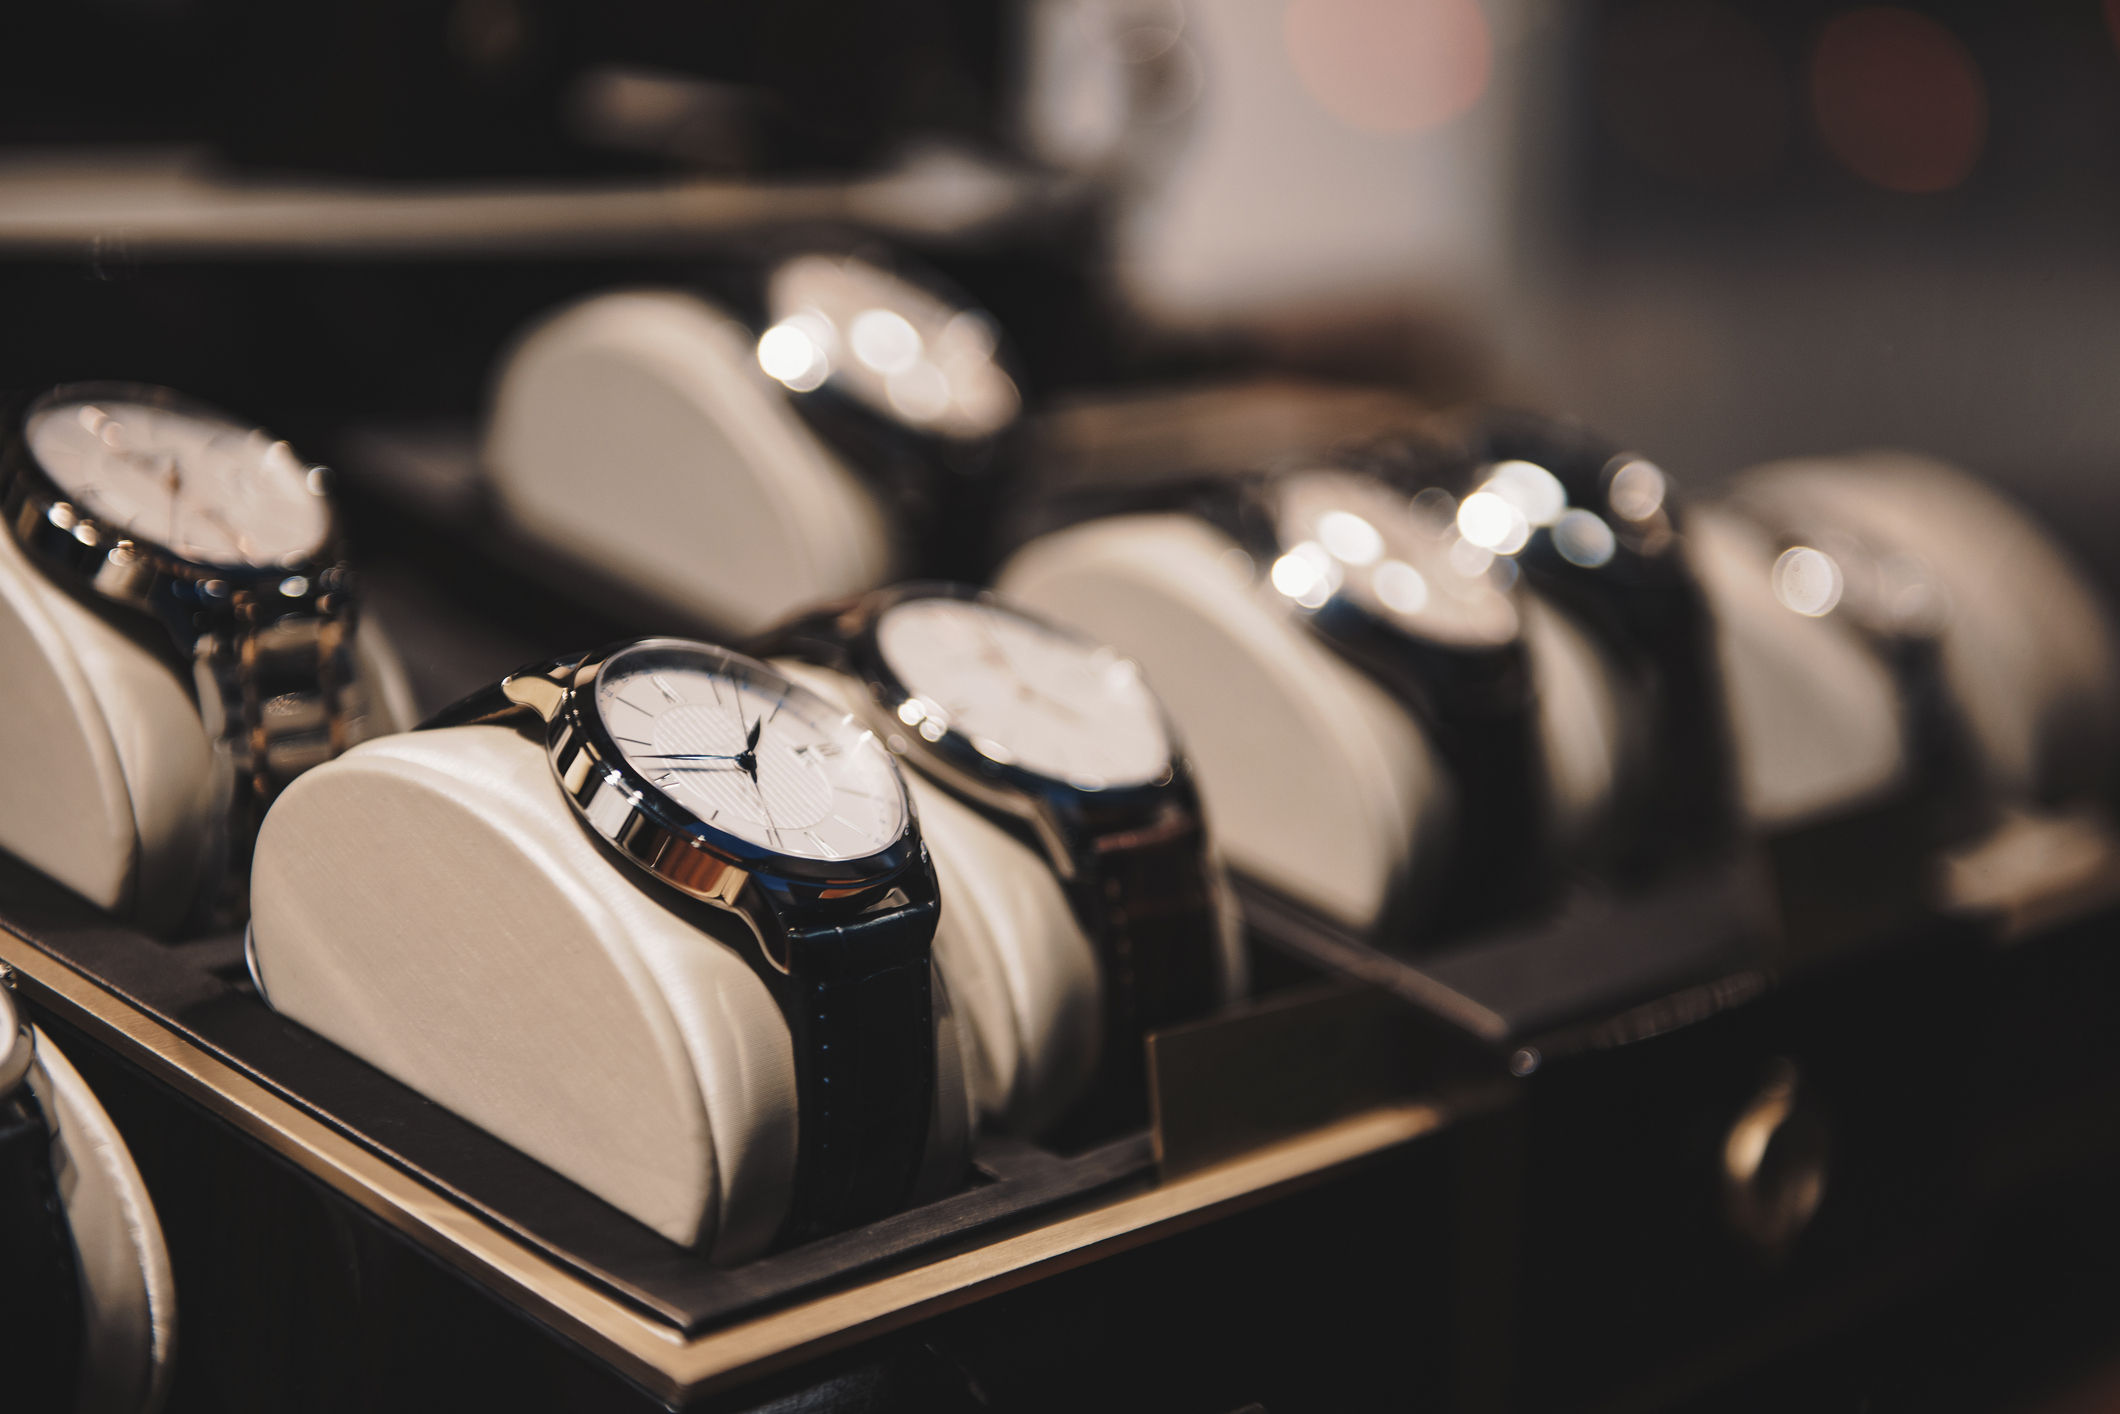 The beginner’s guide to buying luxury watches